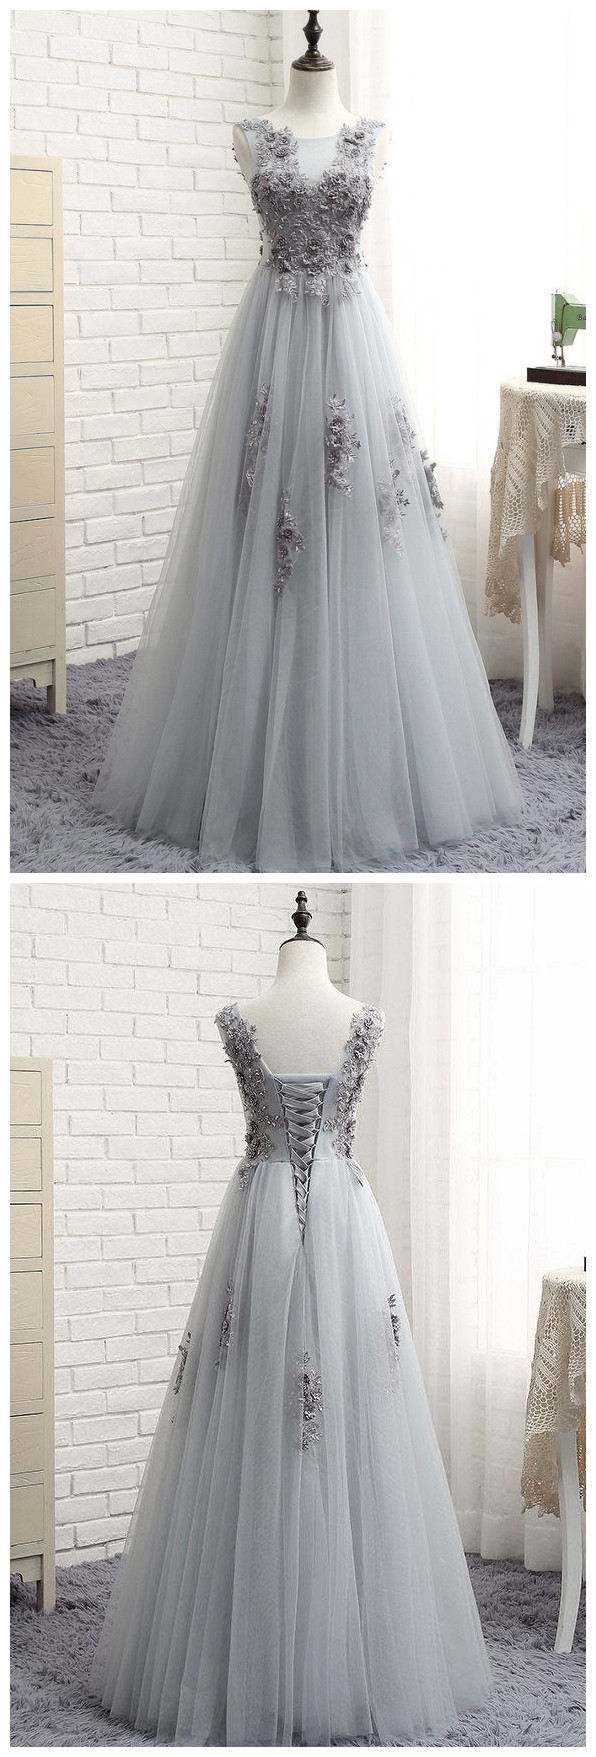 Sliver Gray Sleeveless Floor Length Prom Dresses,appliqued Tulle Prom Dress, Long Lace Appliques Evening Dress